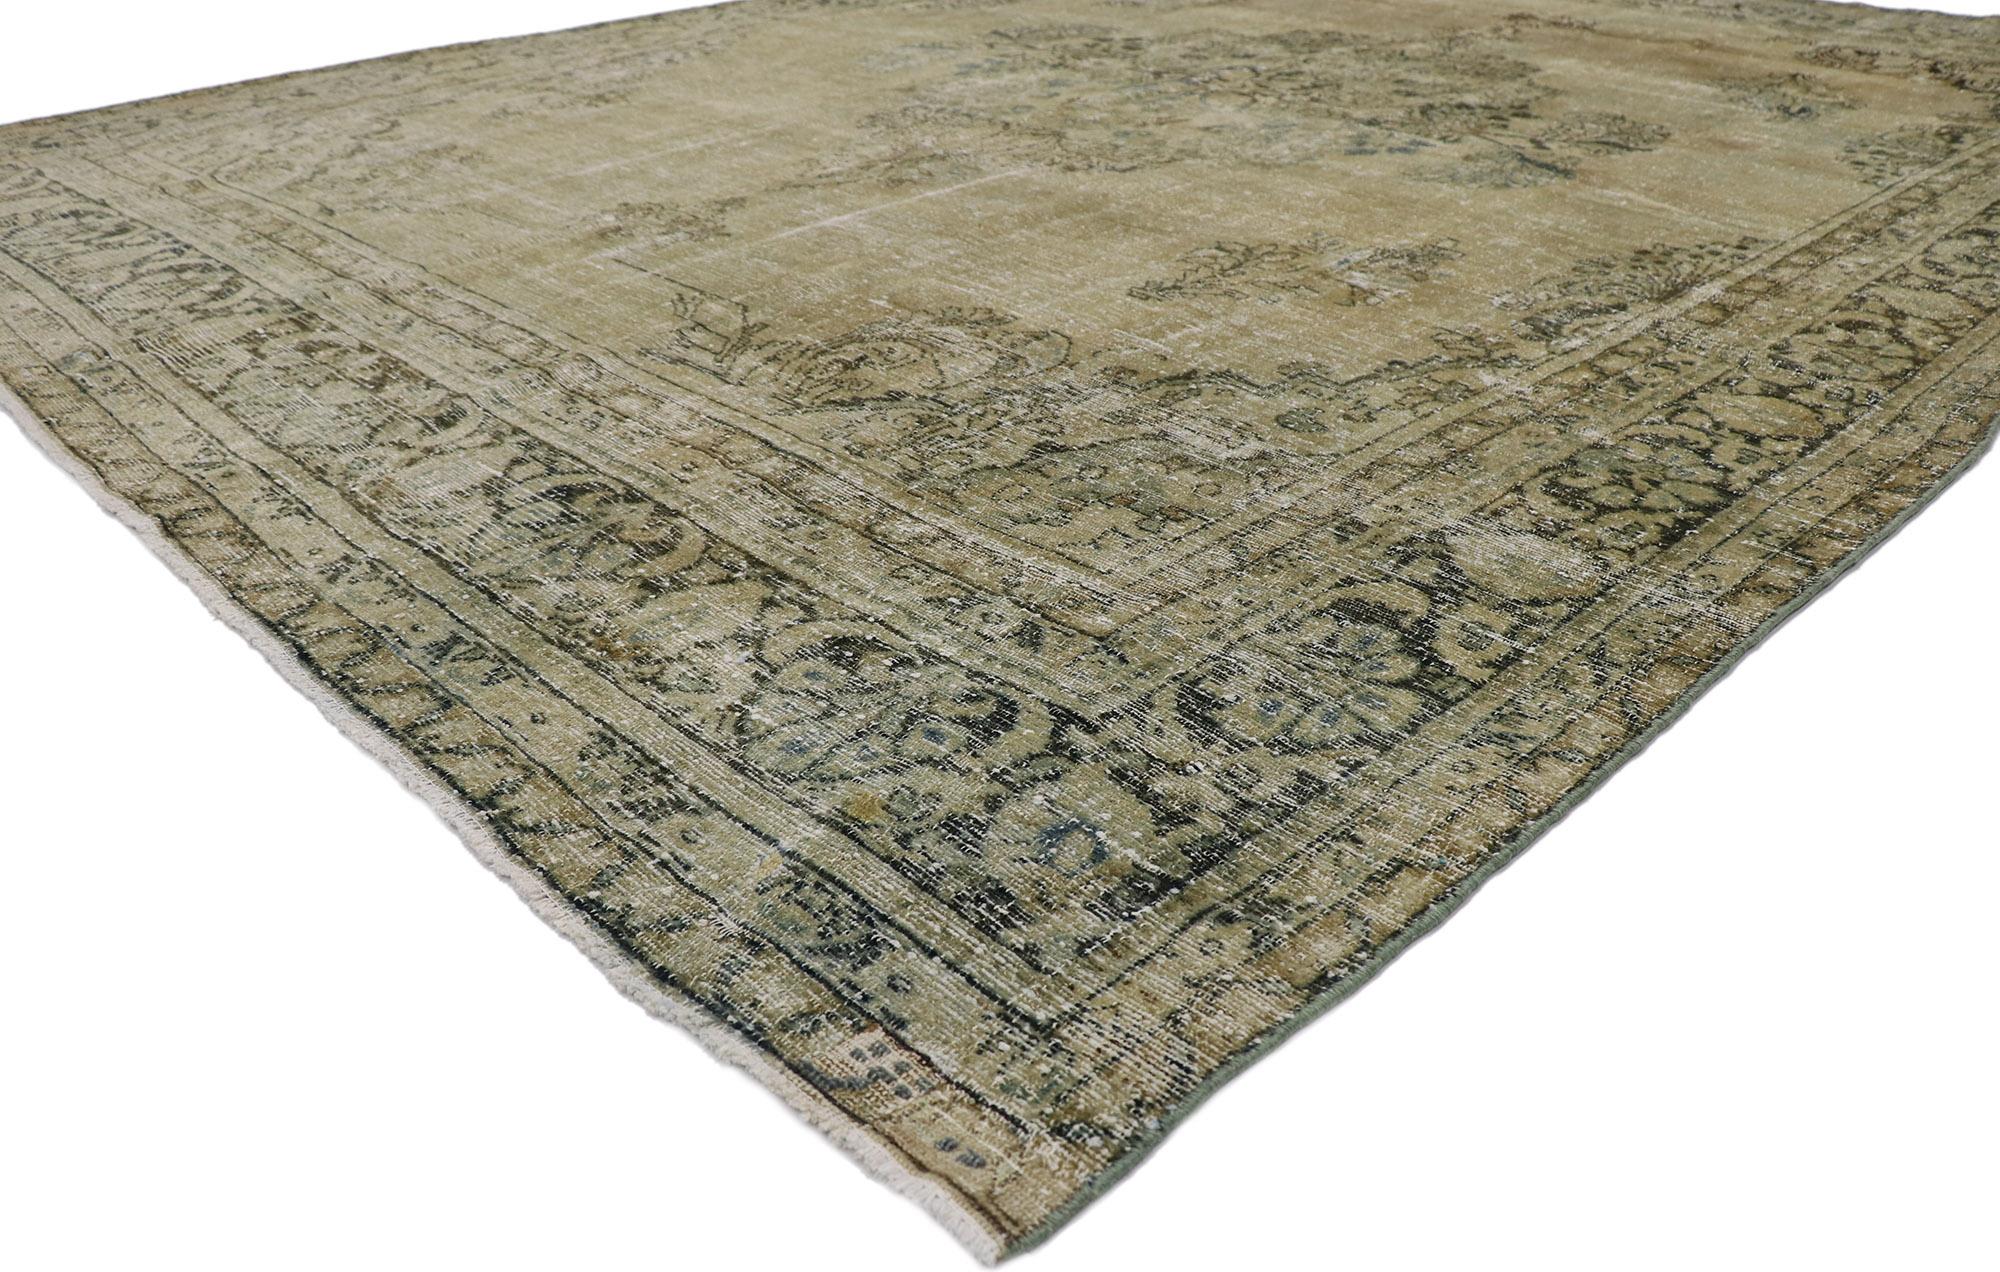 60929 Distressed Antique Persian Mahal Rug 09'06 x 12'04. Warm and inviting with rustic sensibility, this hand-knotted wool distressed antique Persian Mahal is a captivating vision of woven beauty. The weathered brown field features a botanical